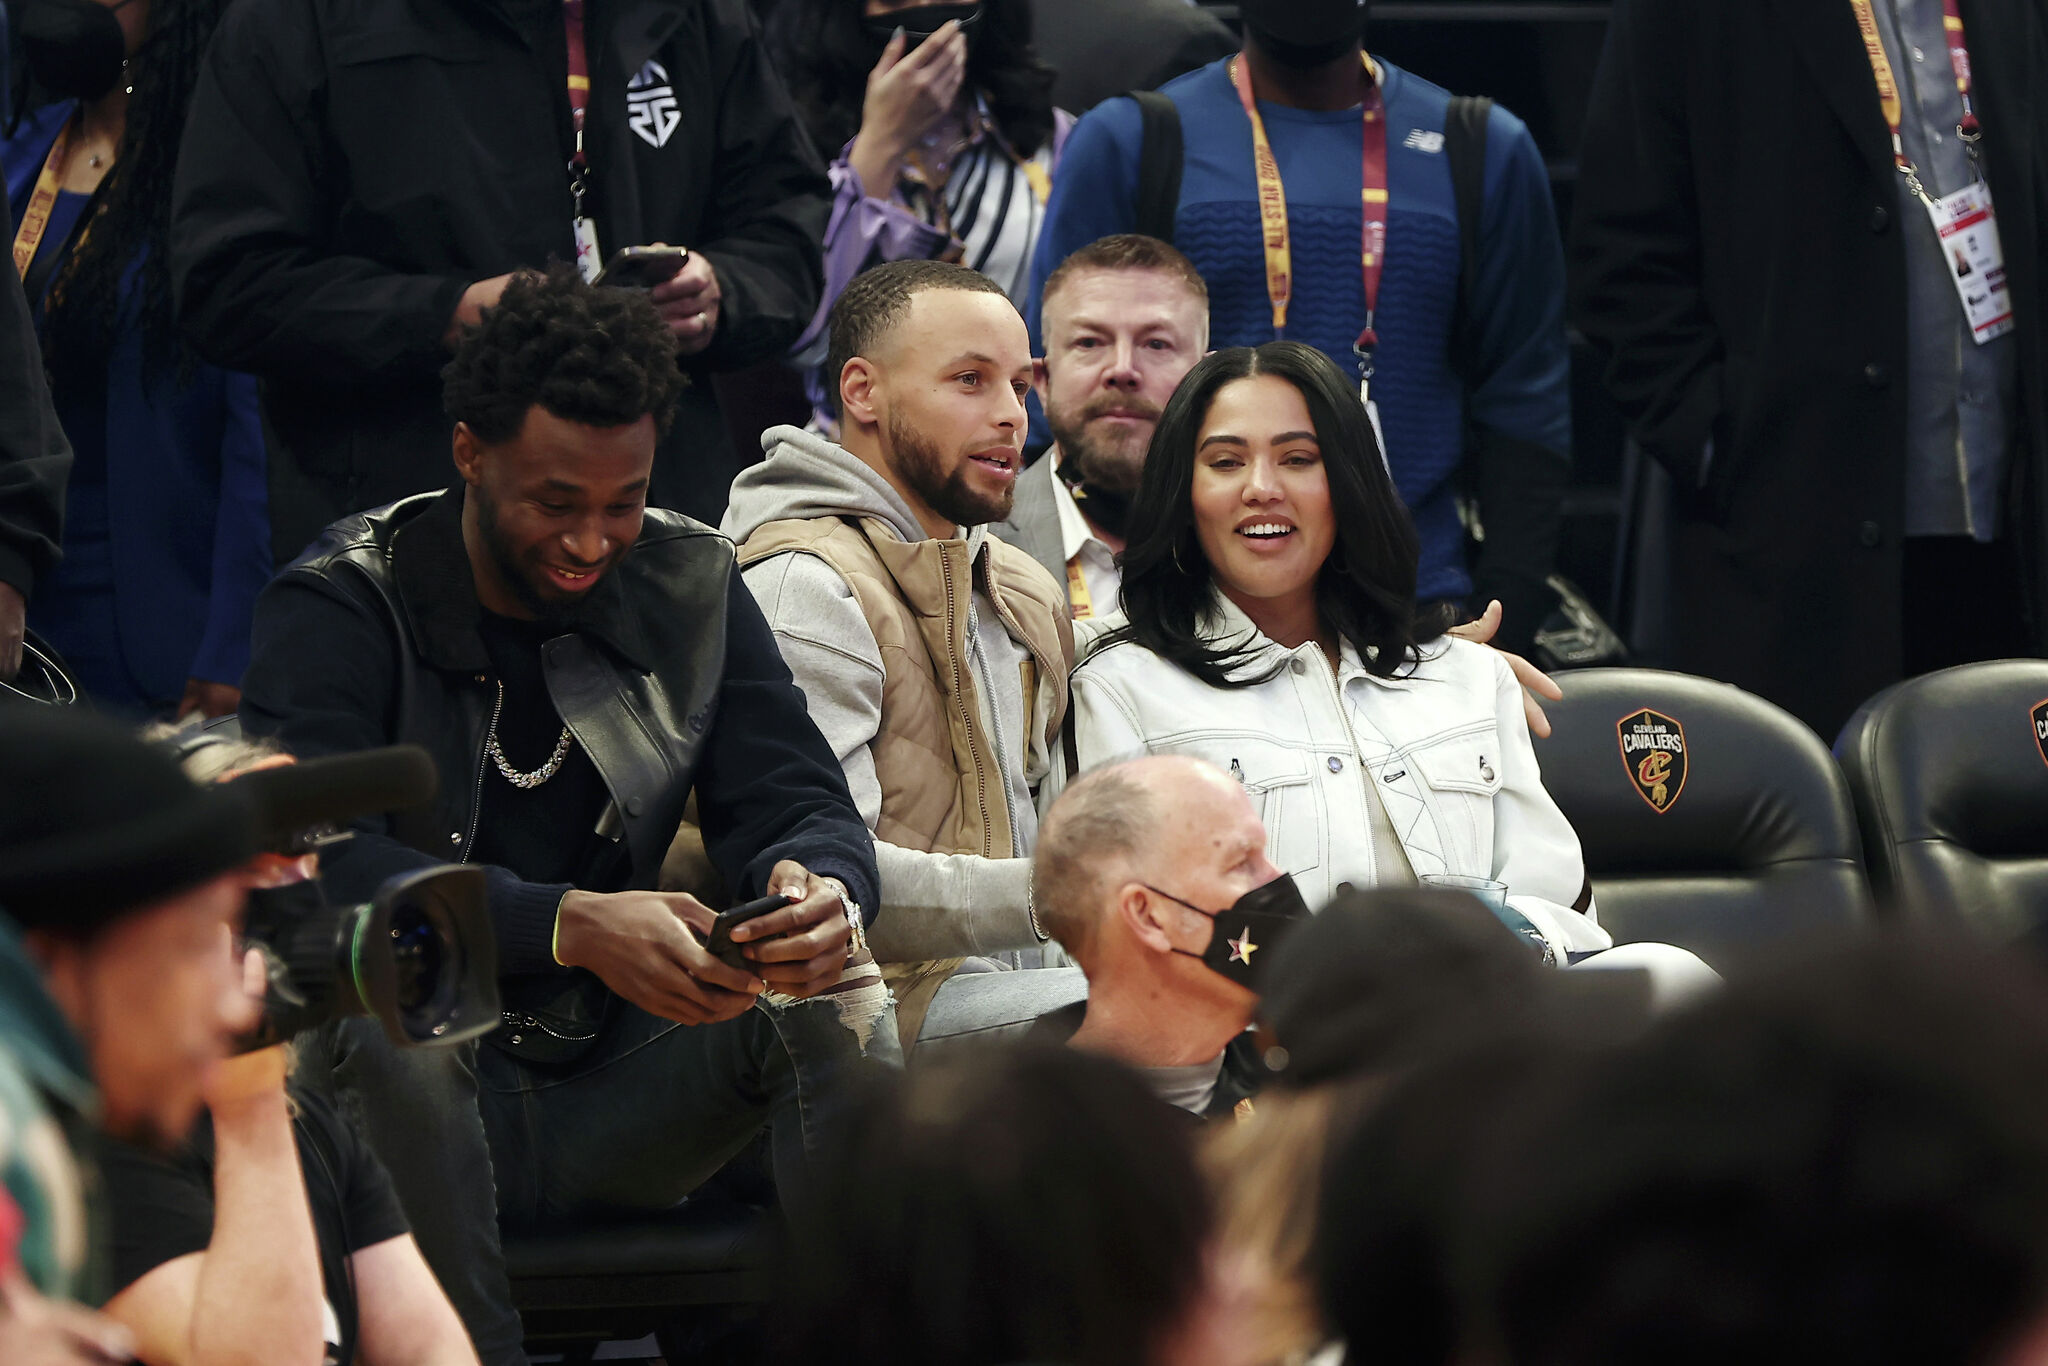 Stephen and Ayesha Curry's Relationship Timeline